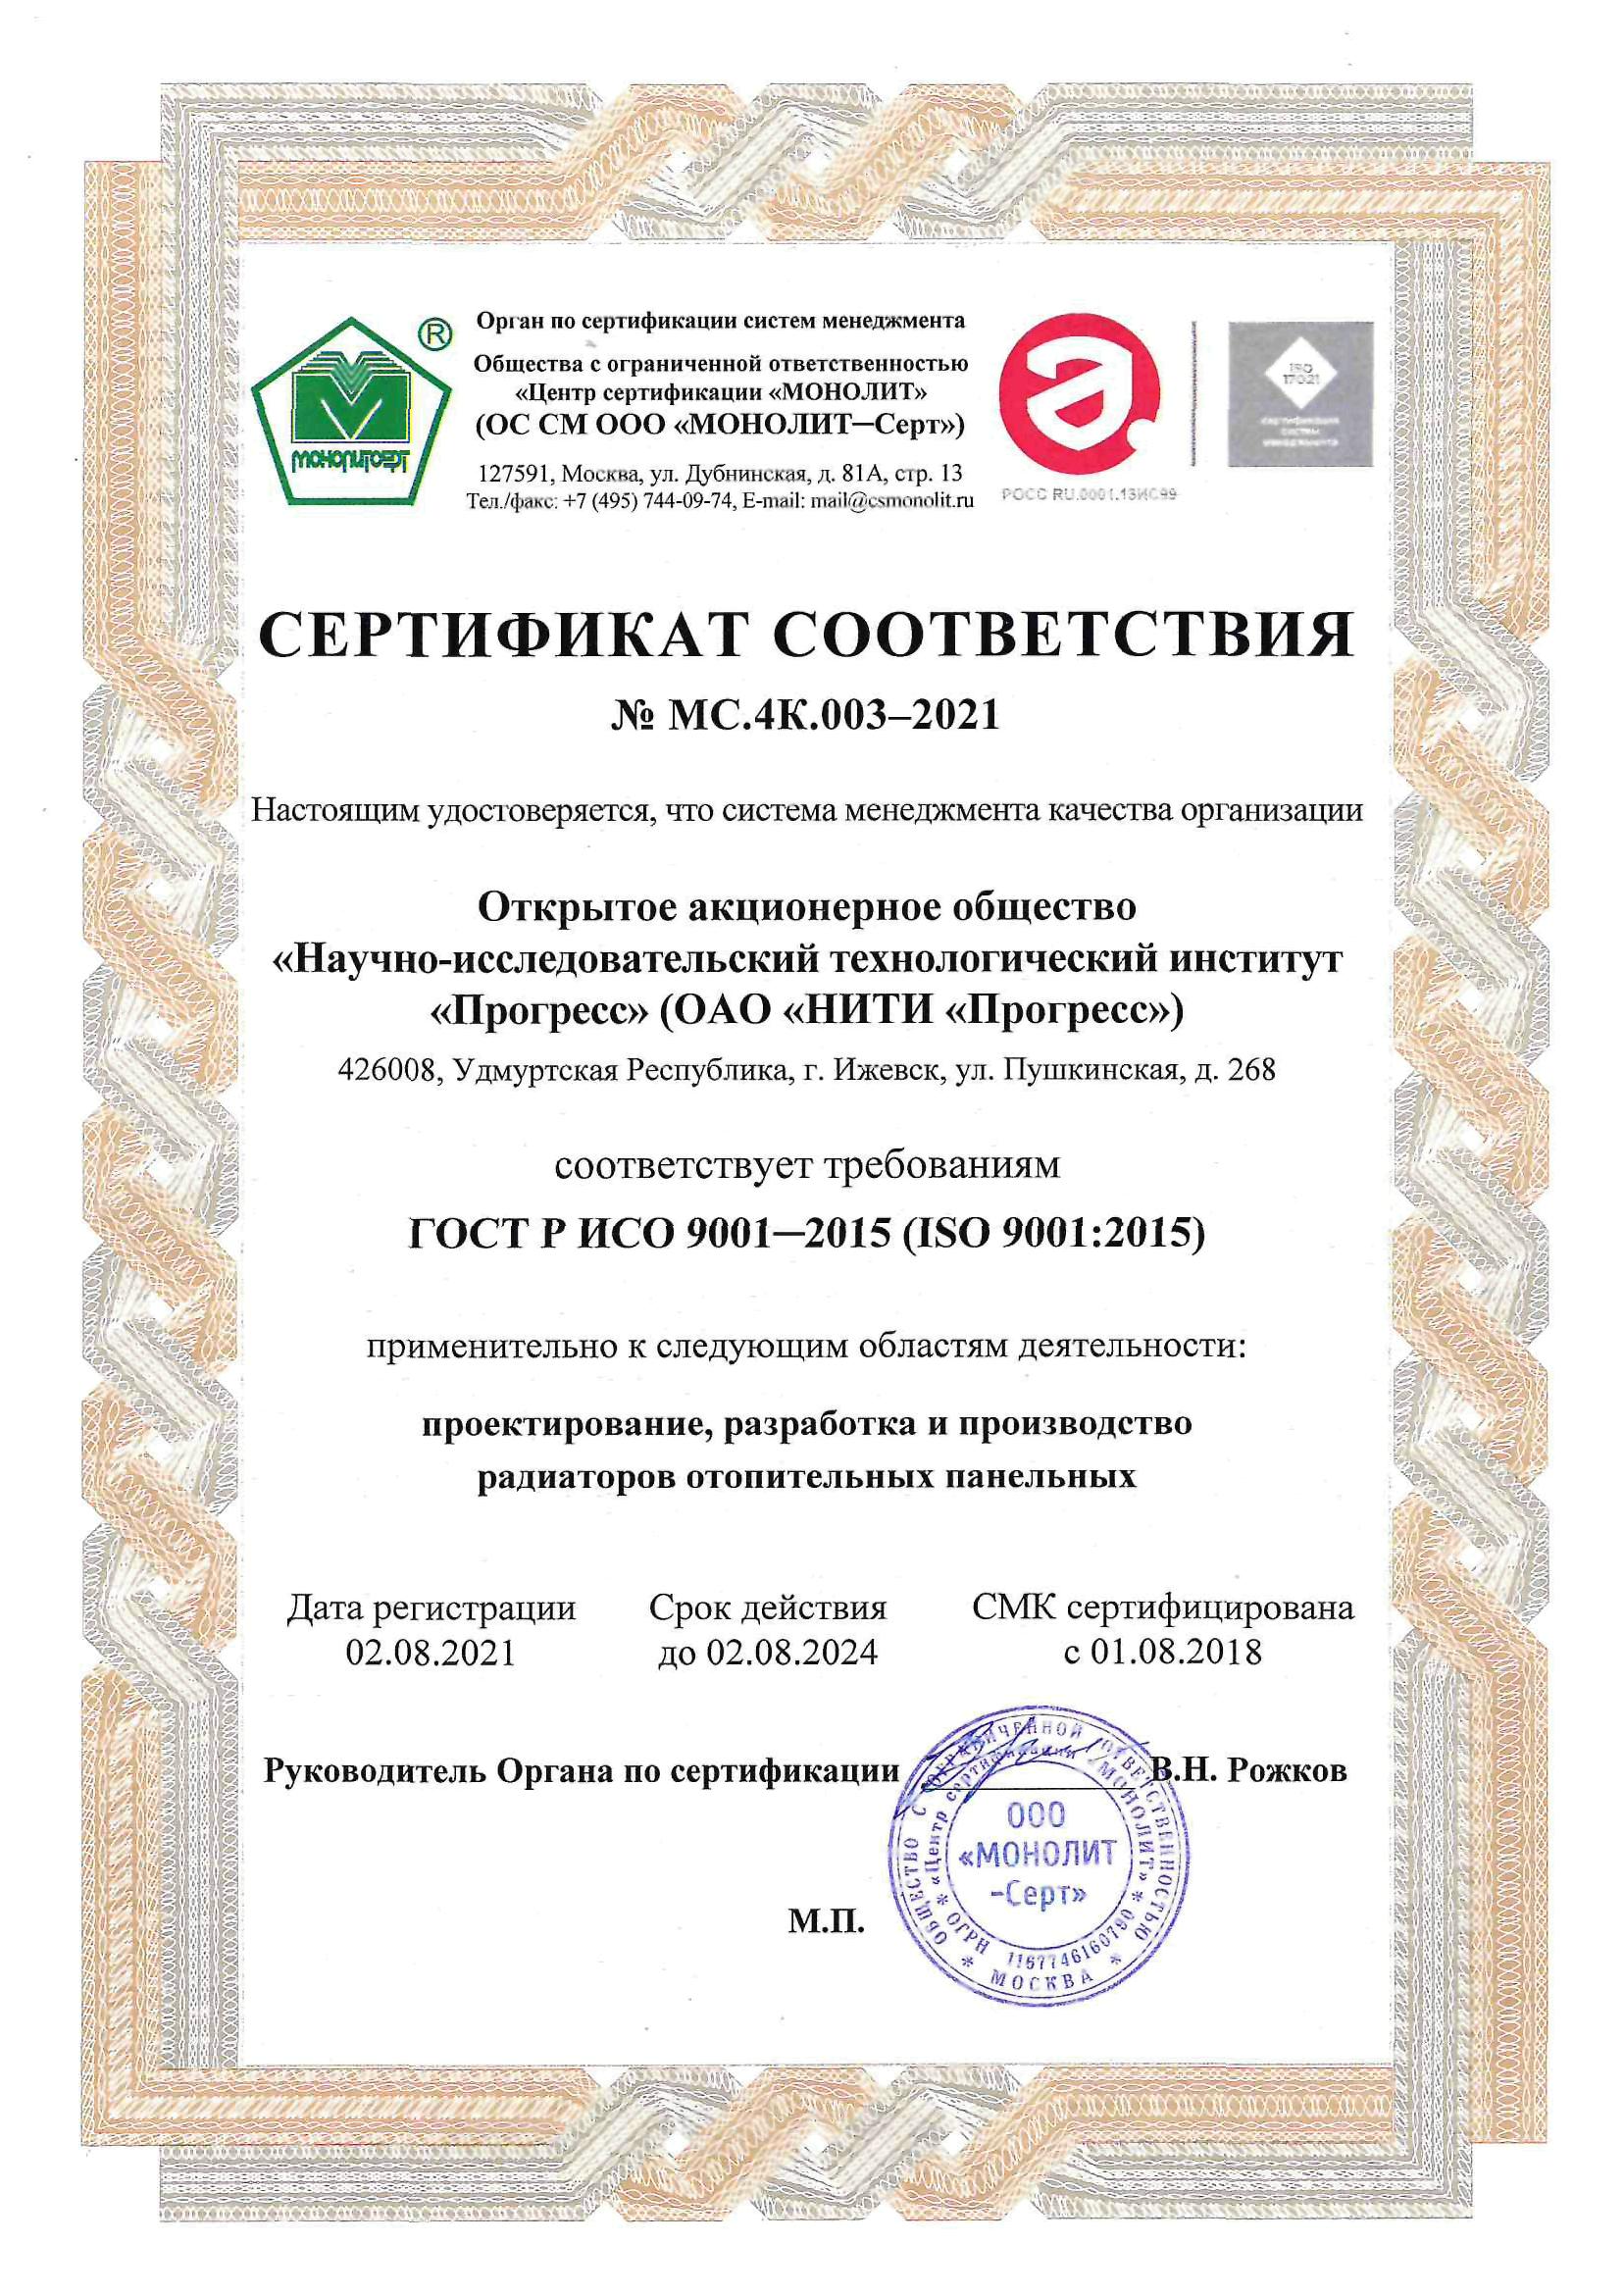 GOST P ISO 9001 2015